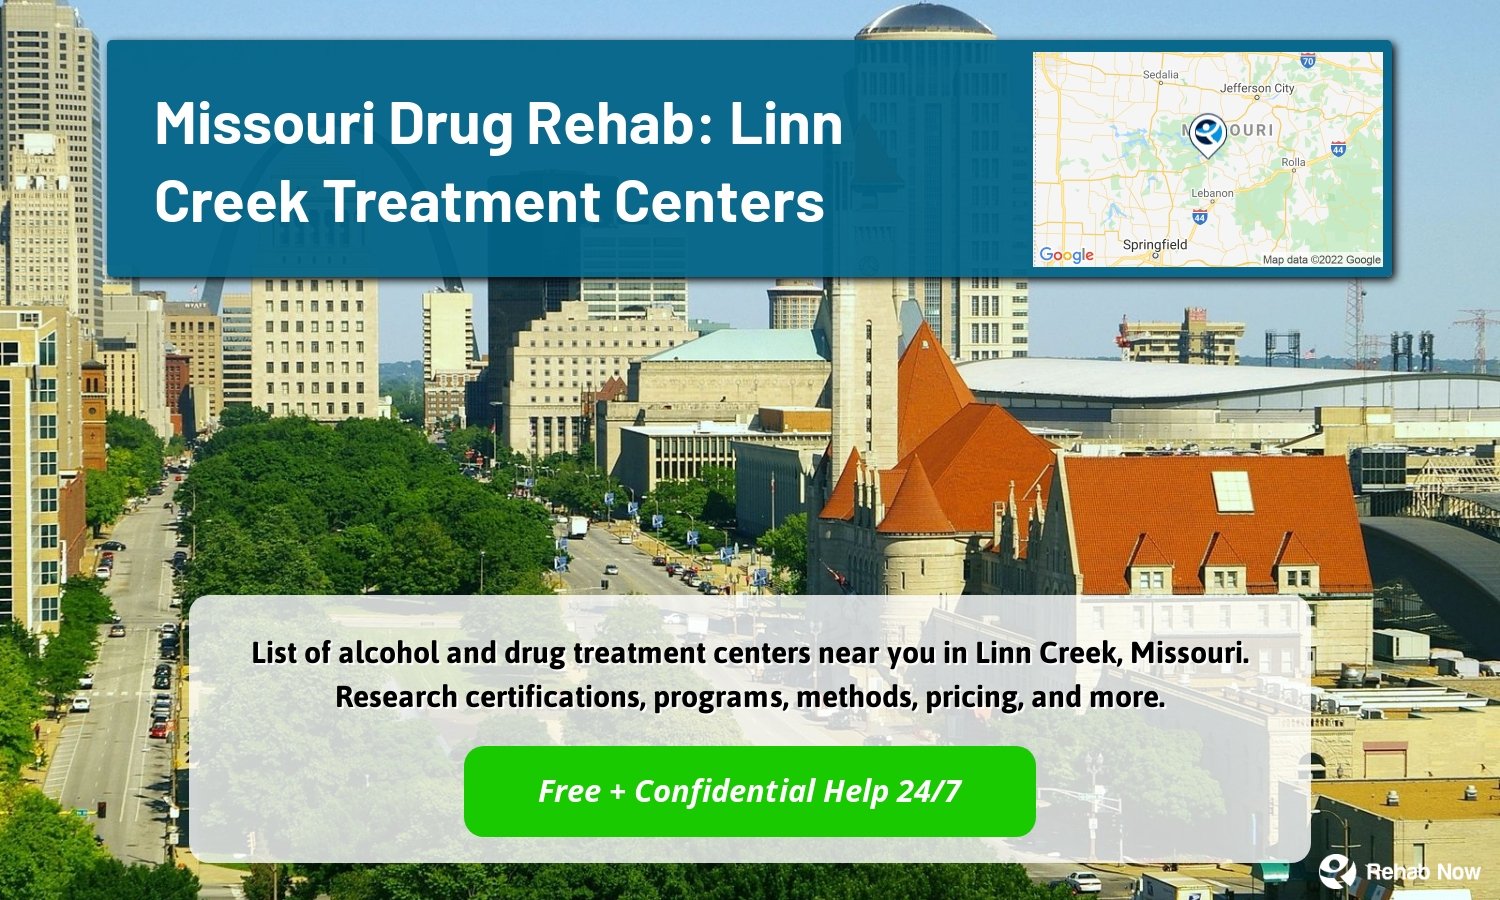 List of alcohol and drug treatment centers near you in Linn Creek, Missouri. Research certifications, programs, methods, pricing, and more.